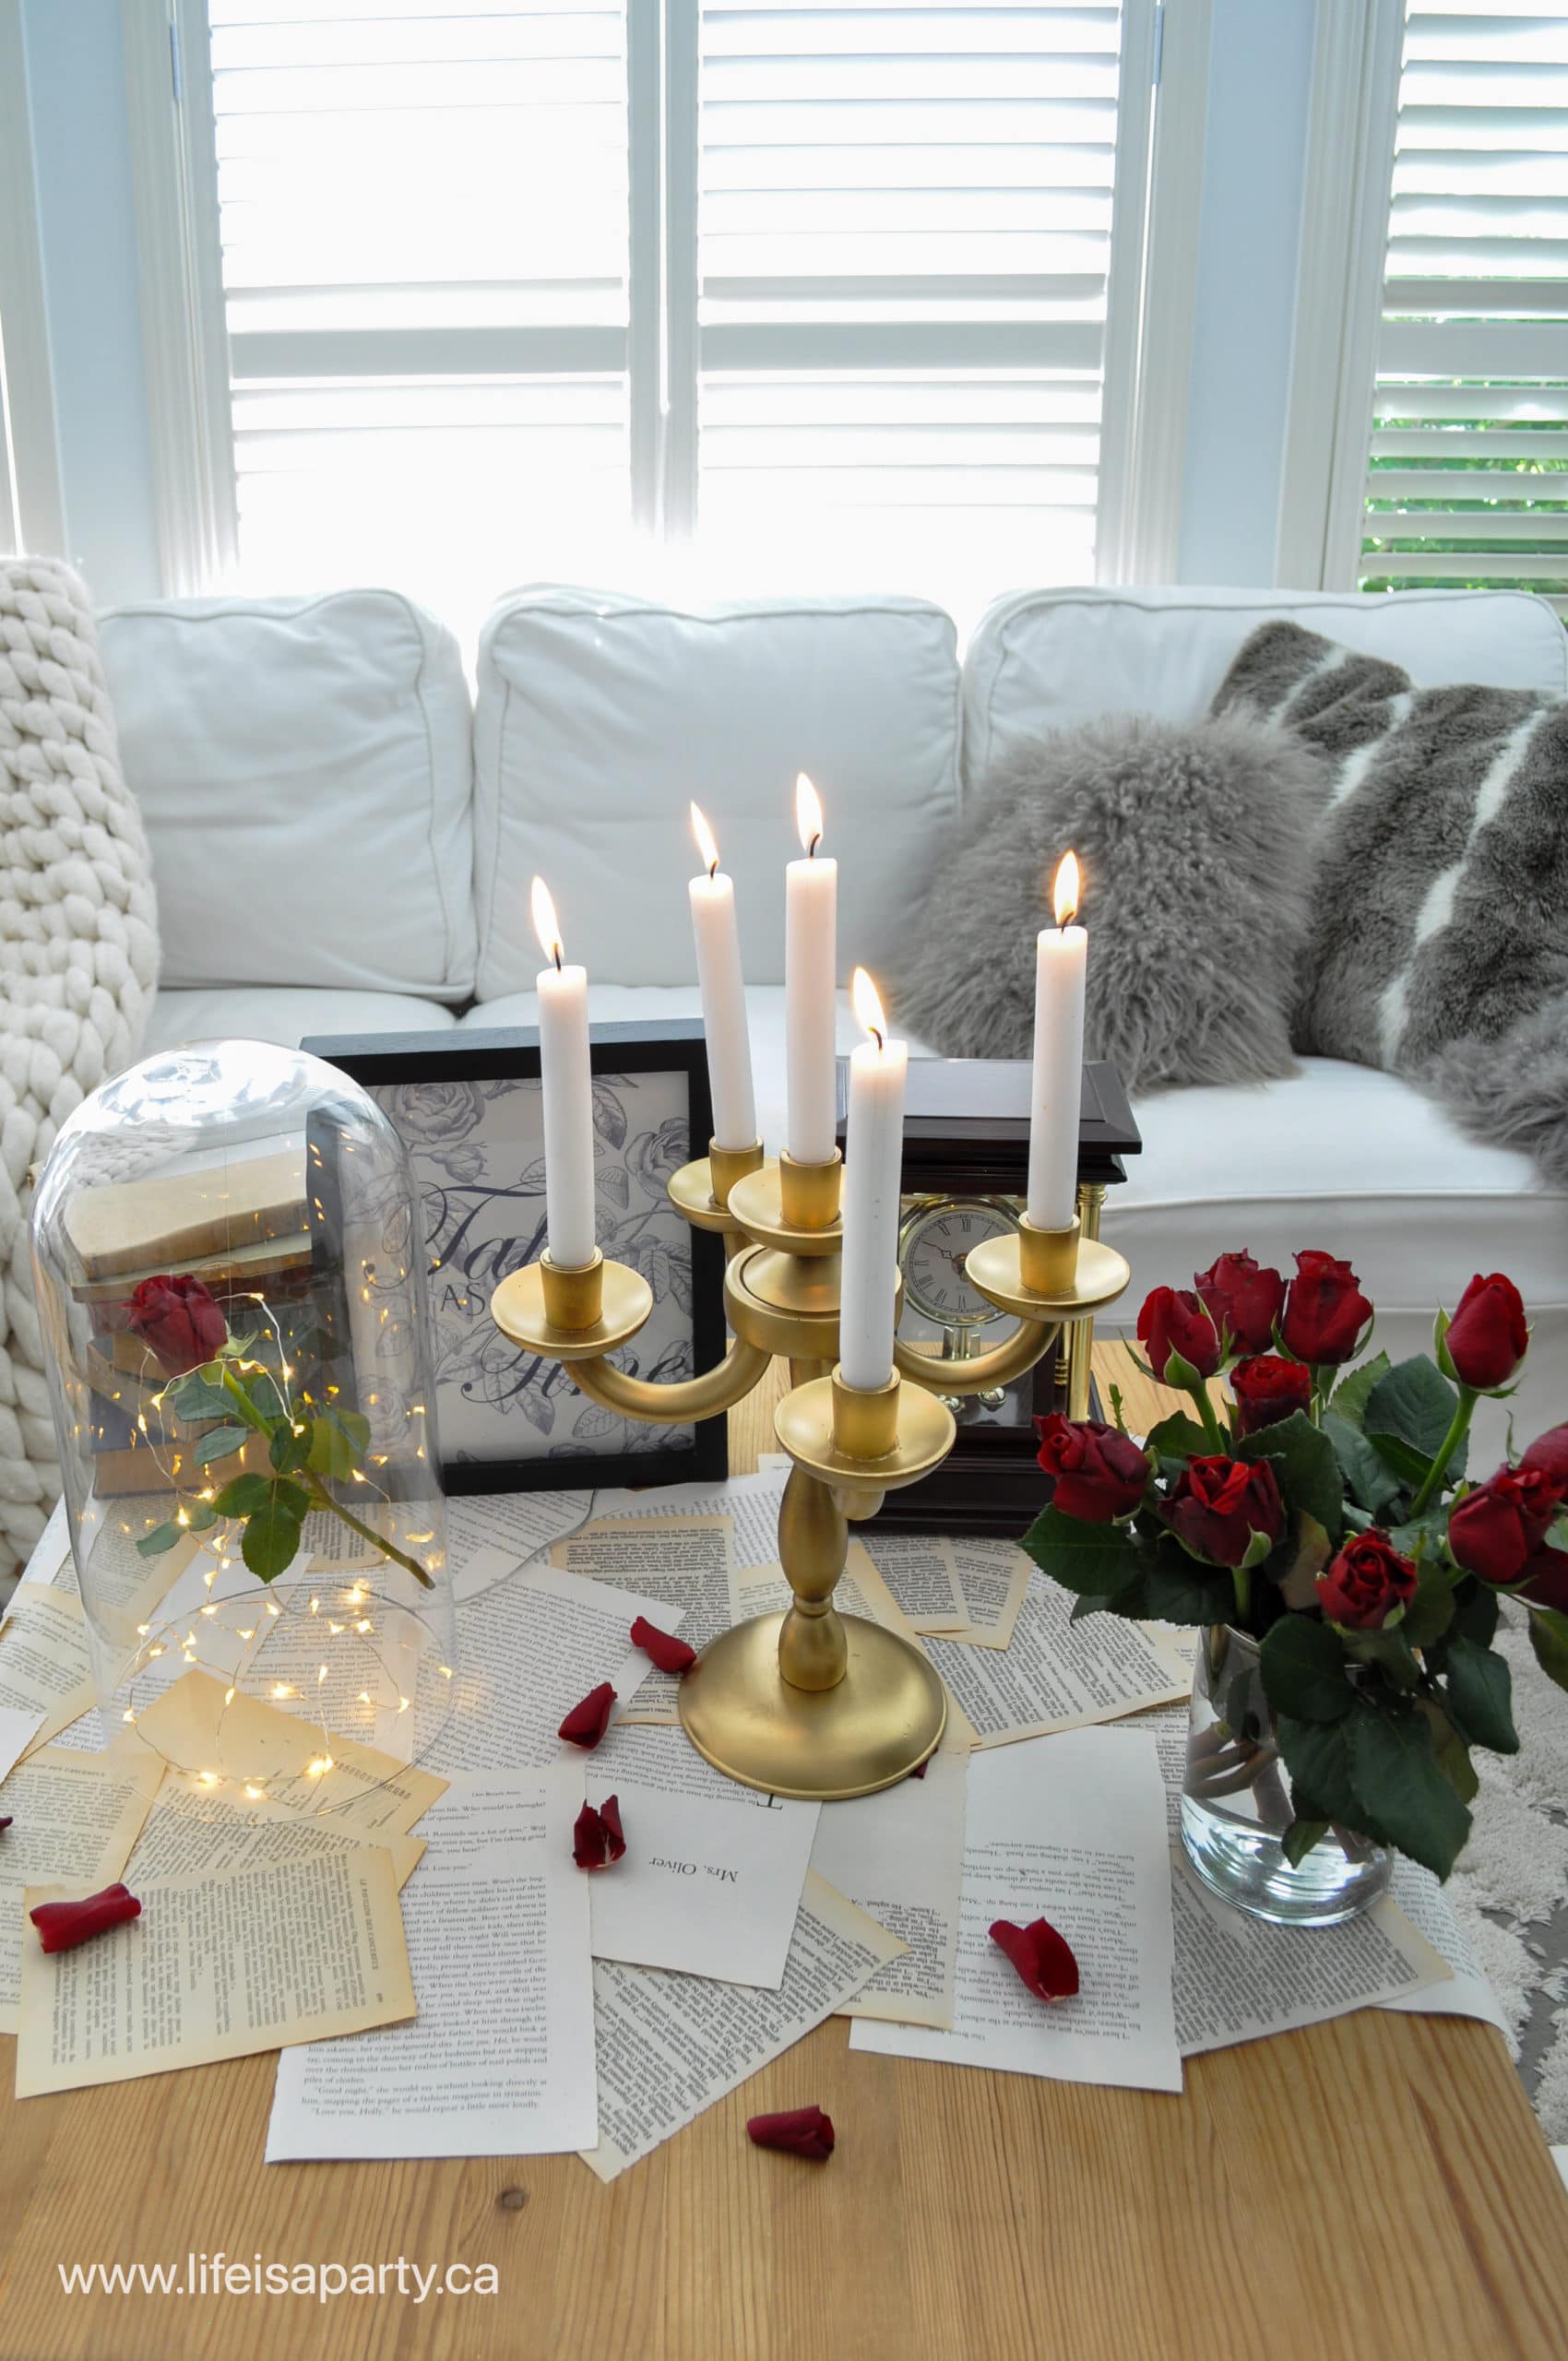 how to decorate for a beauty and the beast party